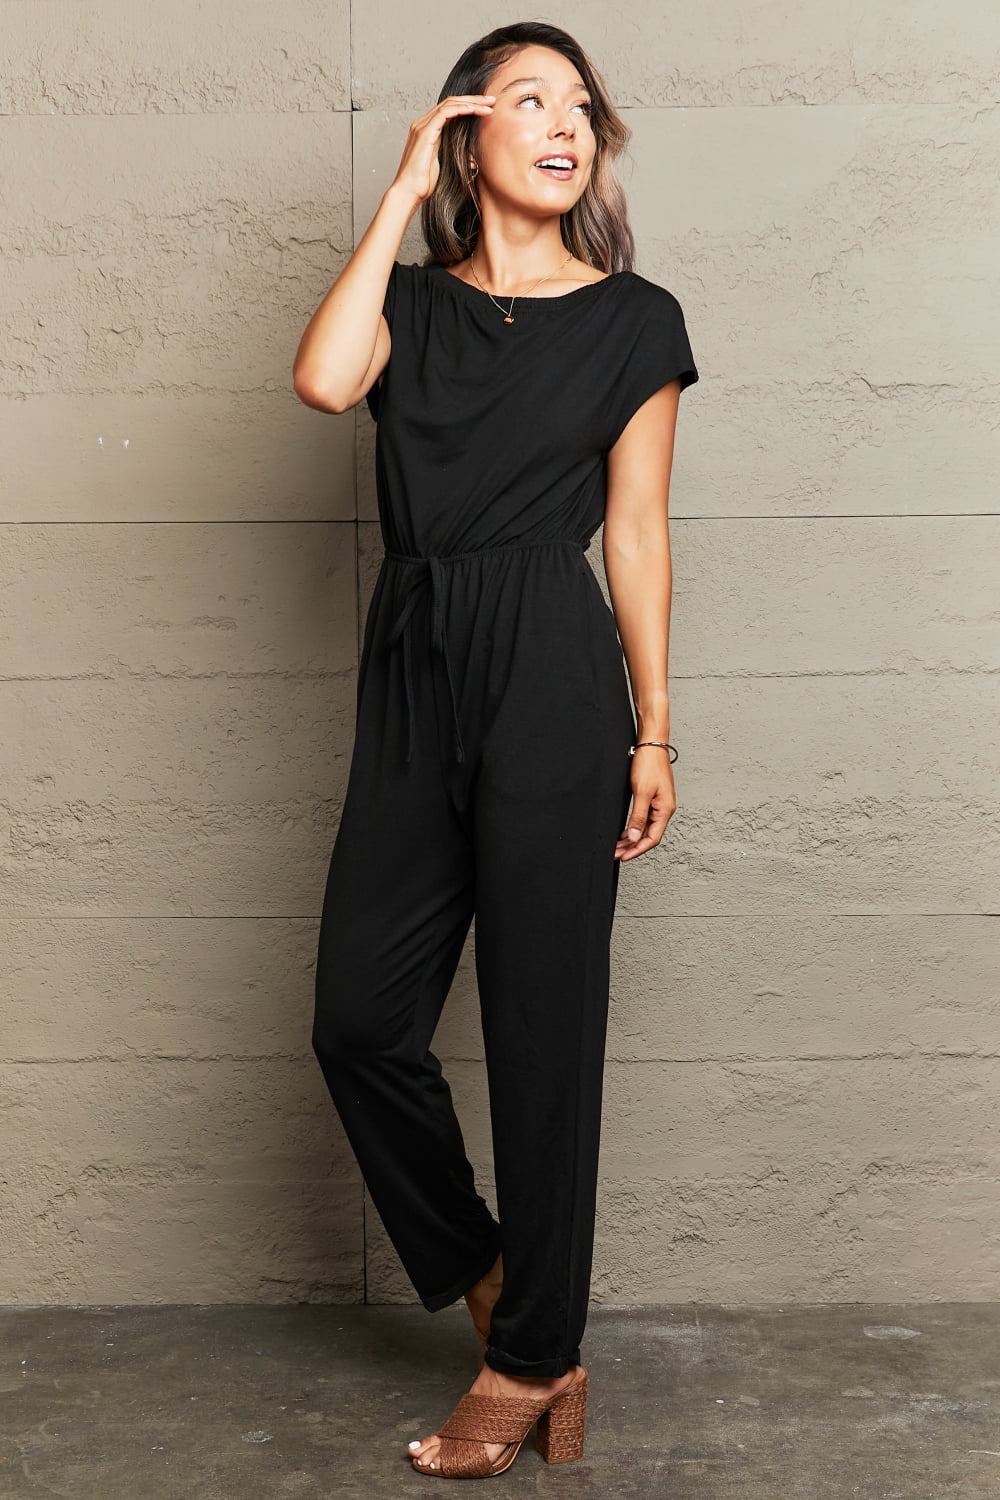 Women’s Boat Neck Short Sleeve Jumpsuit with Pockets